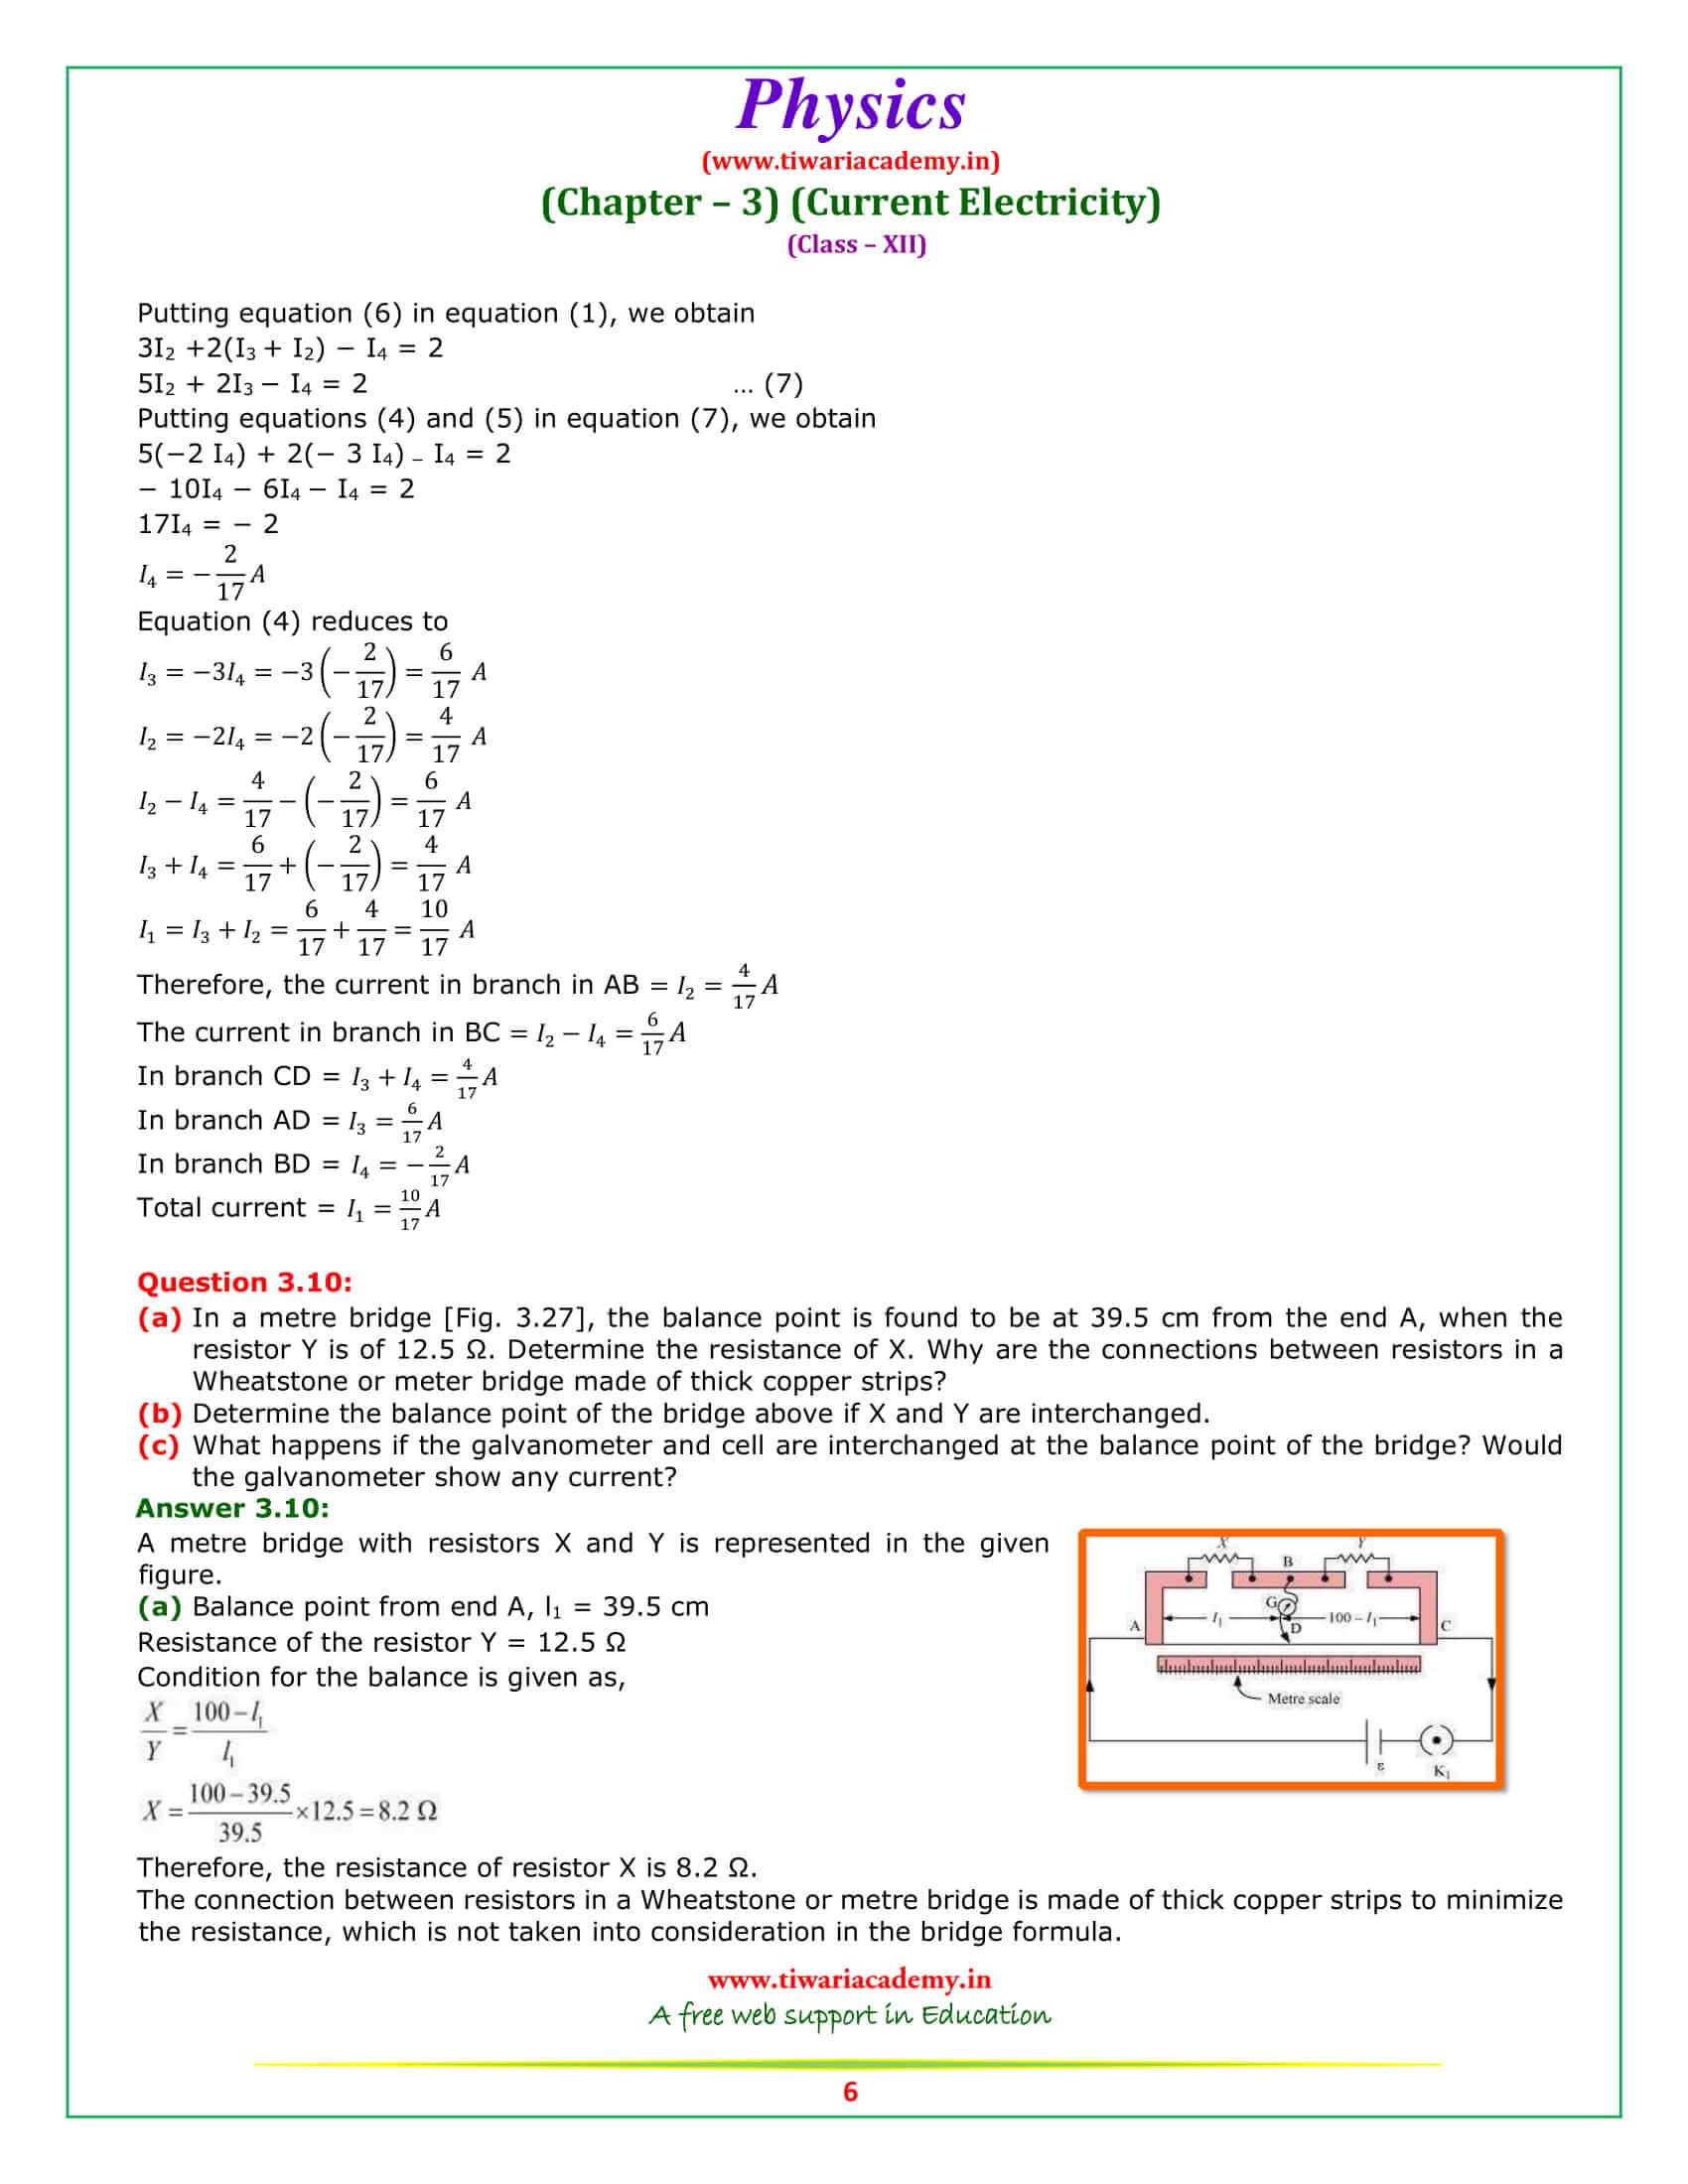 NCERT Solutions for Class 12 Physics Chapter 3 free download